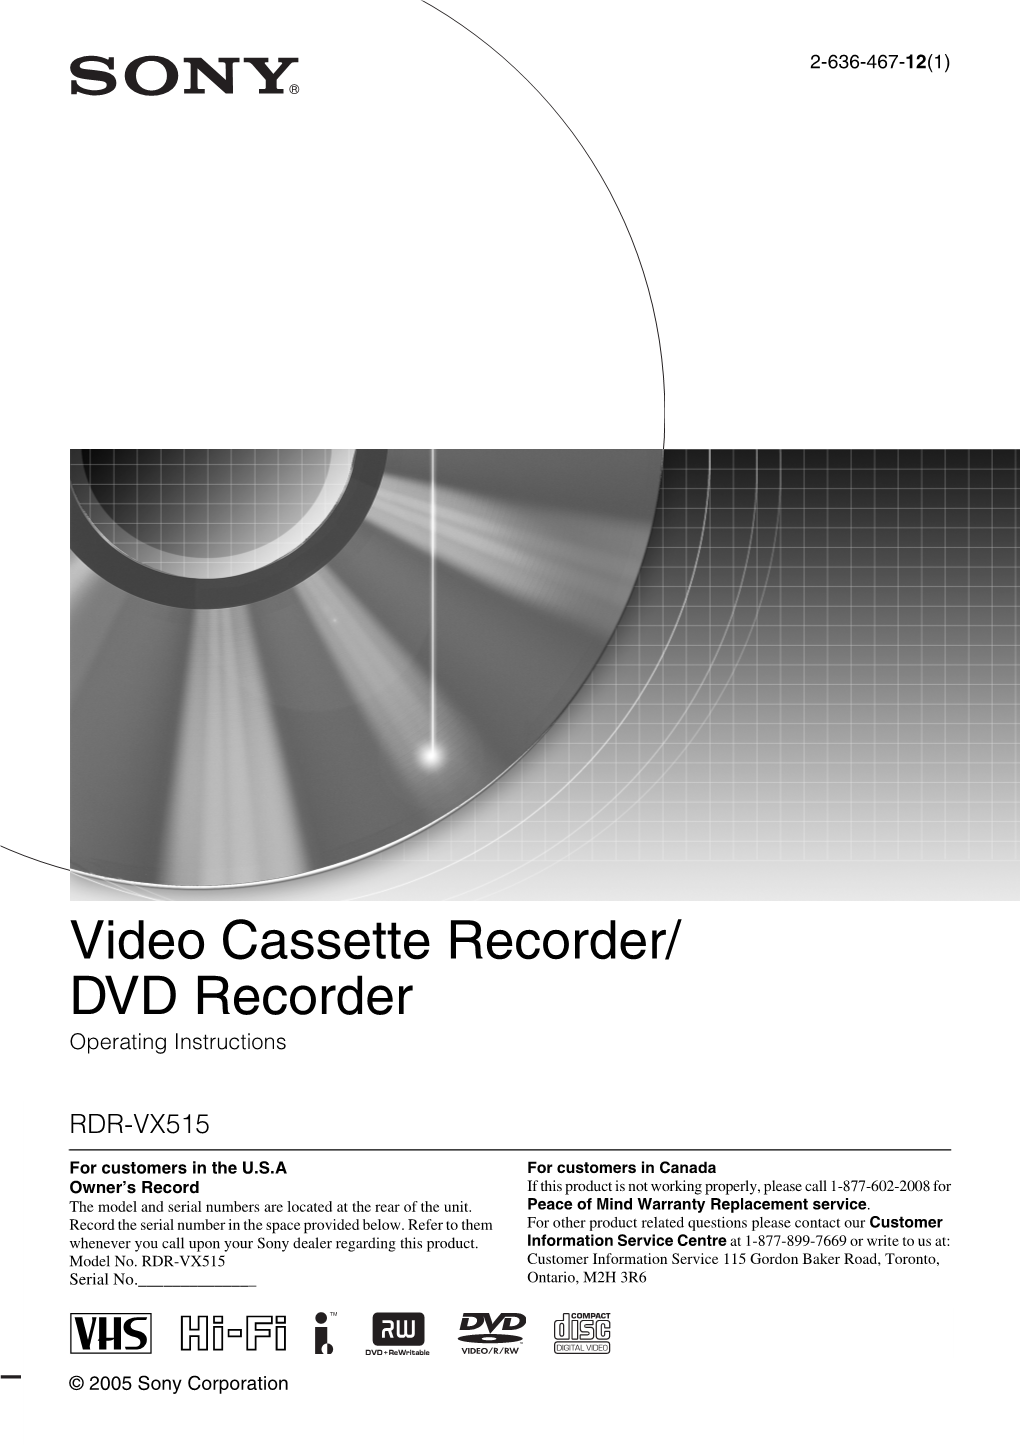 Video Cassette Recorder/ DVD Recorder Operating Instructions